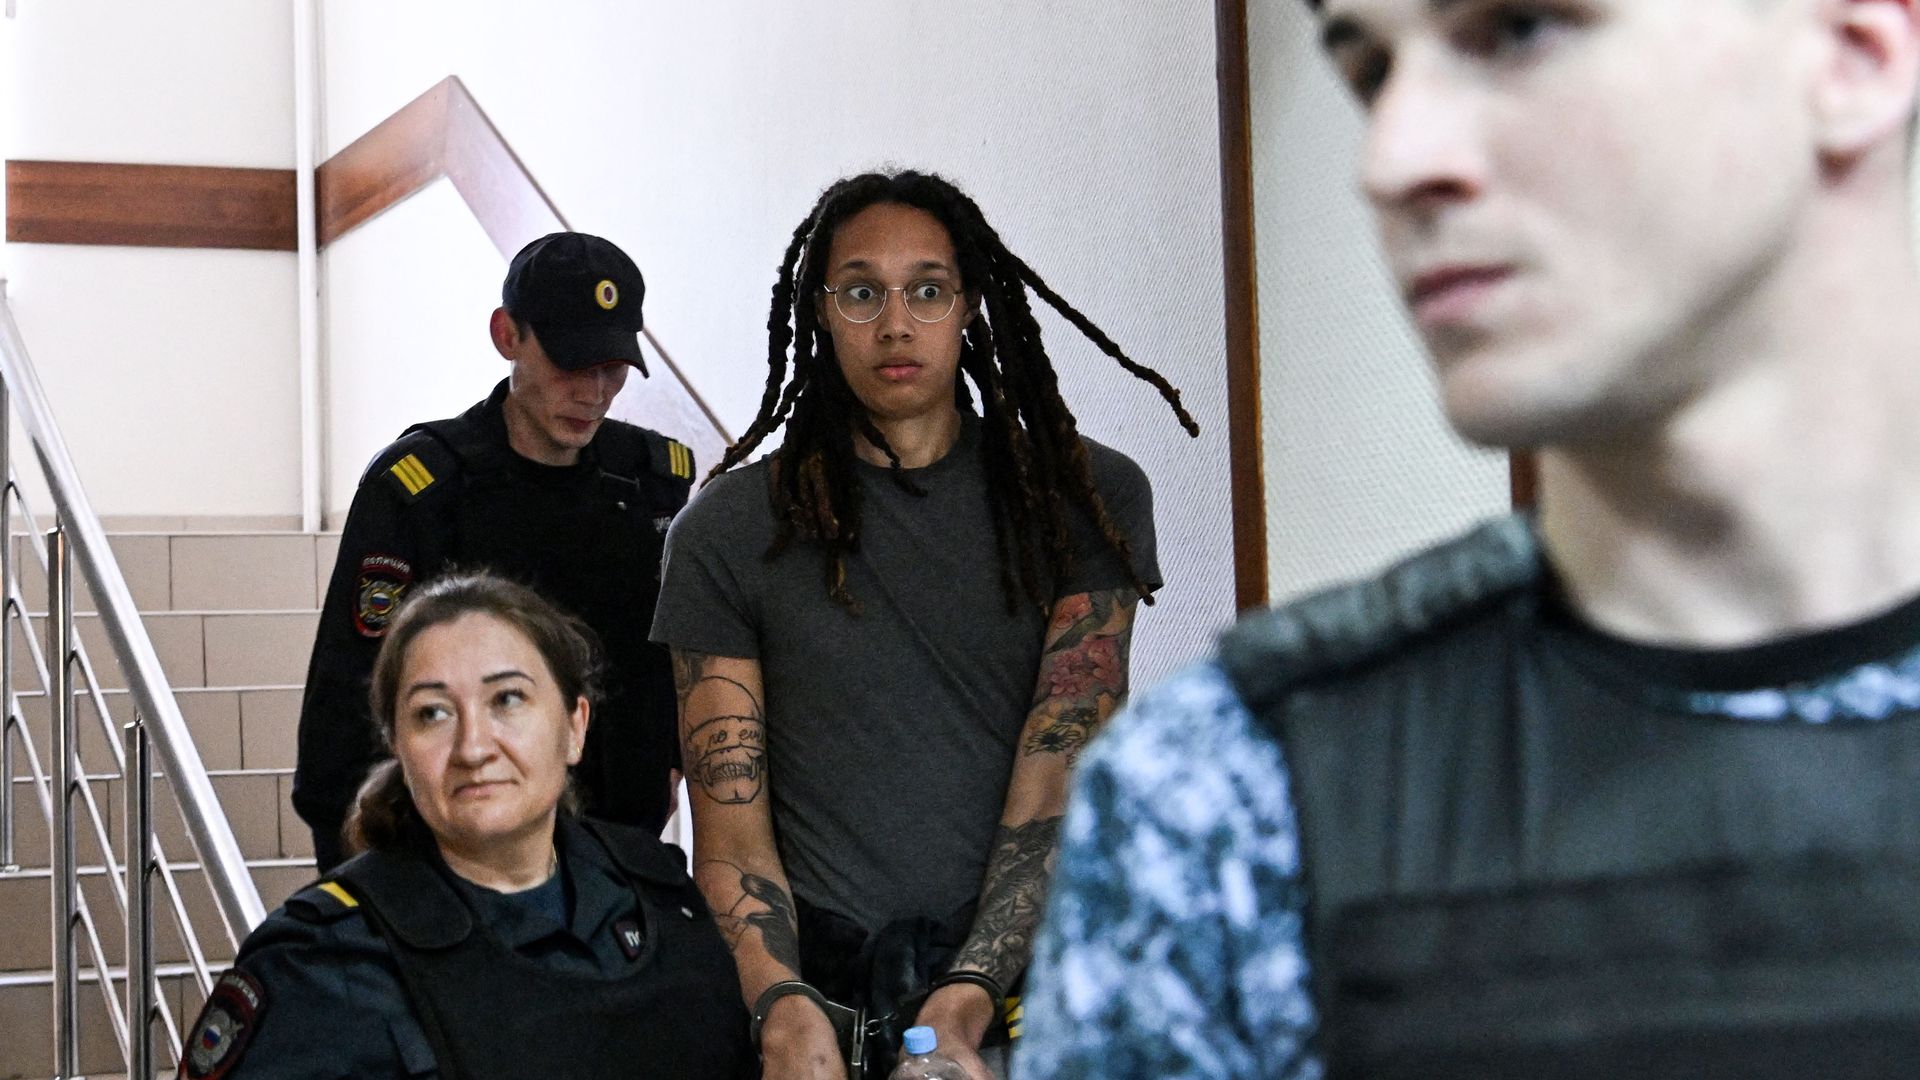 WNBA basketball superstar Brittney Griner arrives to a hearing at the Khimki Court, outside Moscow on June 27, 2022.